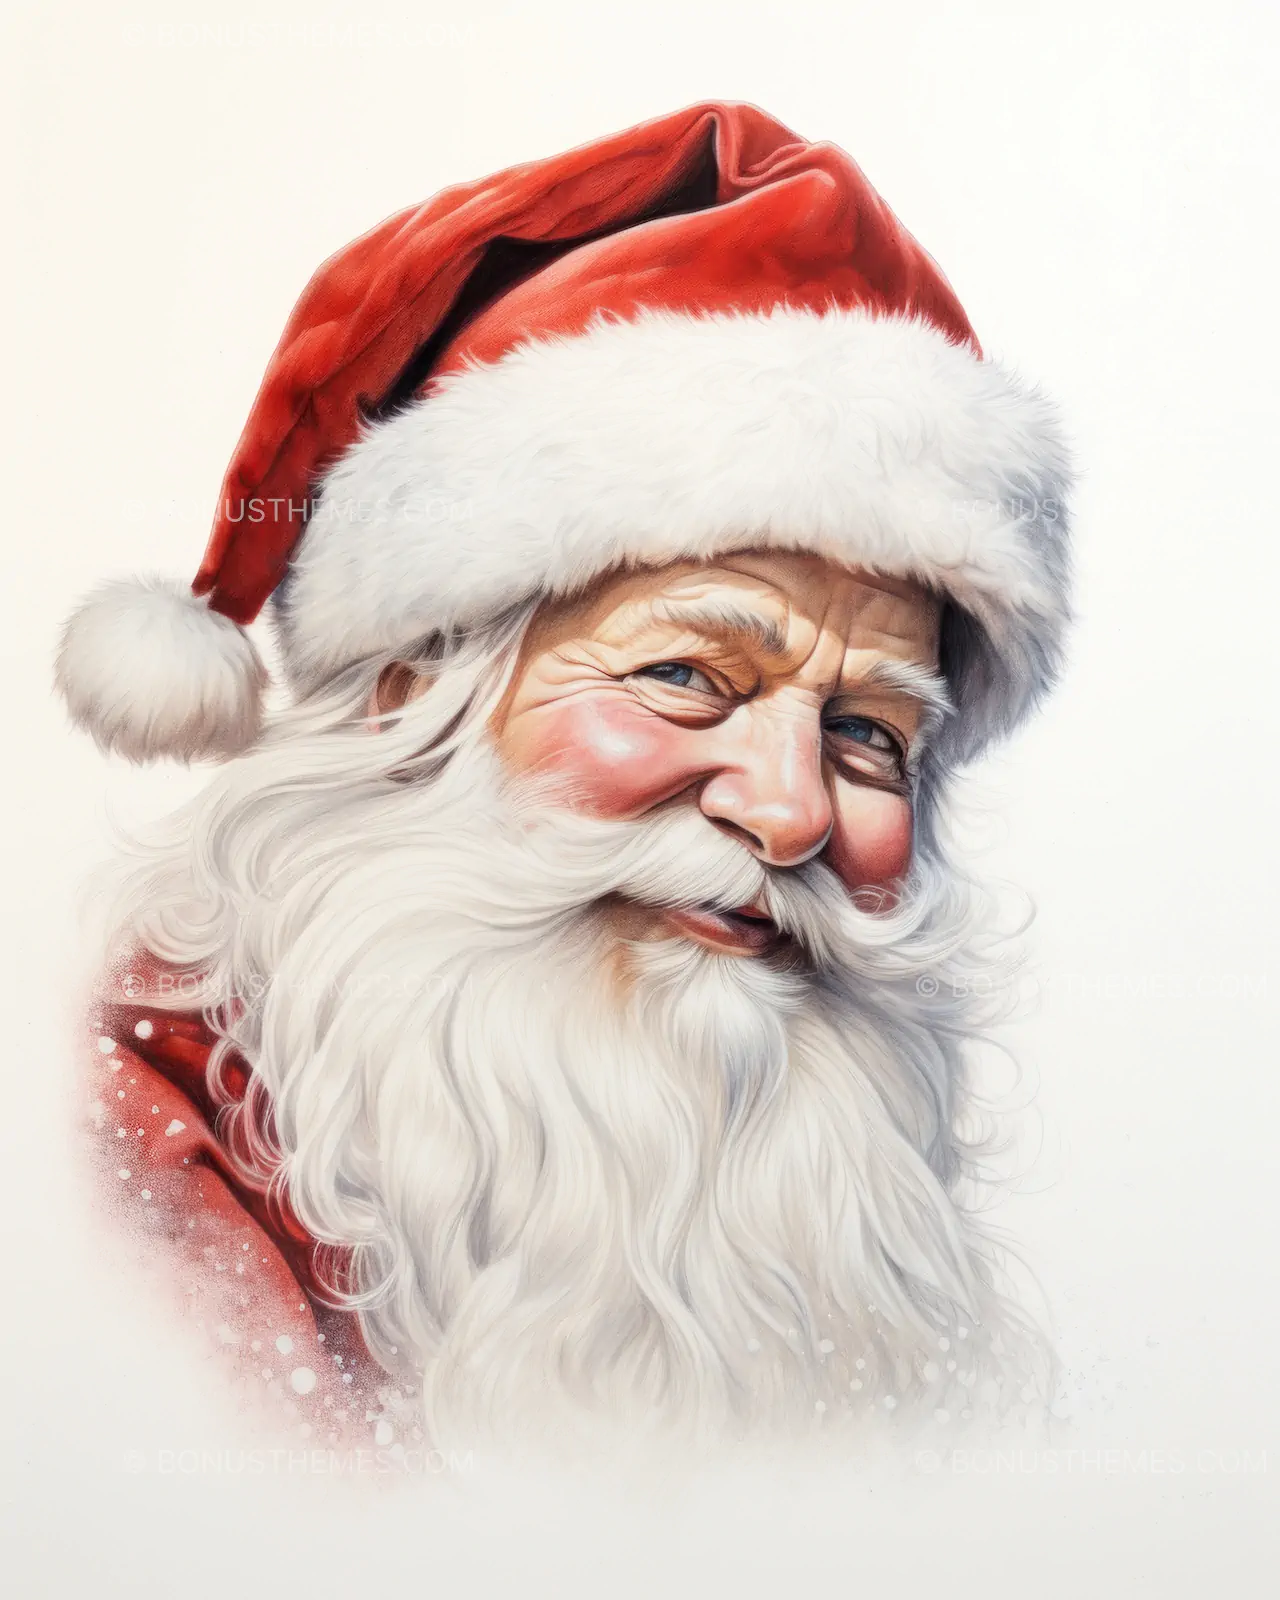 Closeup portrait of a Santa Claus on isolated white background